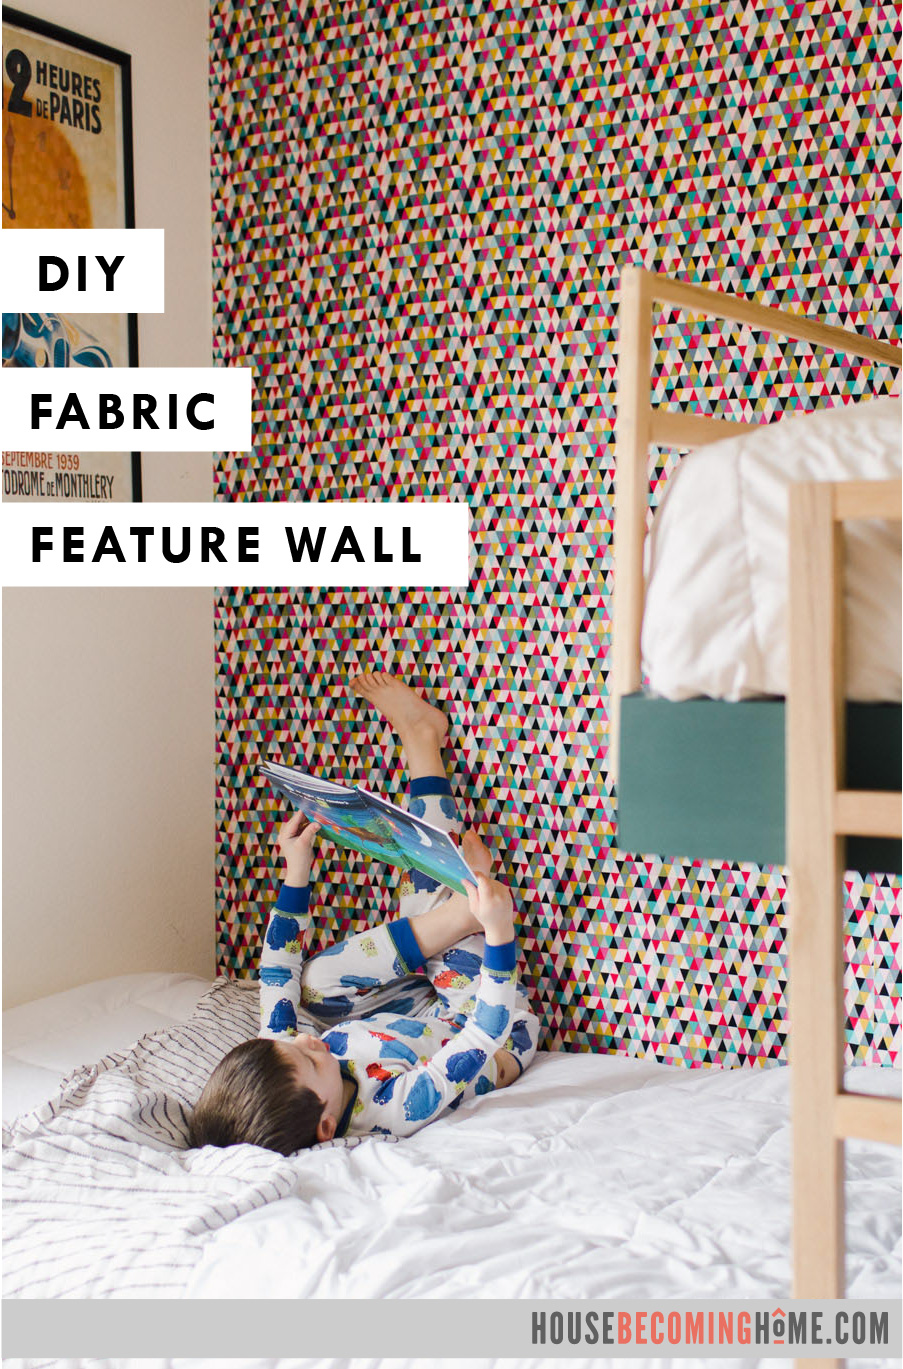 Wallflowers (aka: How To Cover A Wall With Fabric)